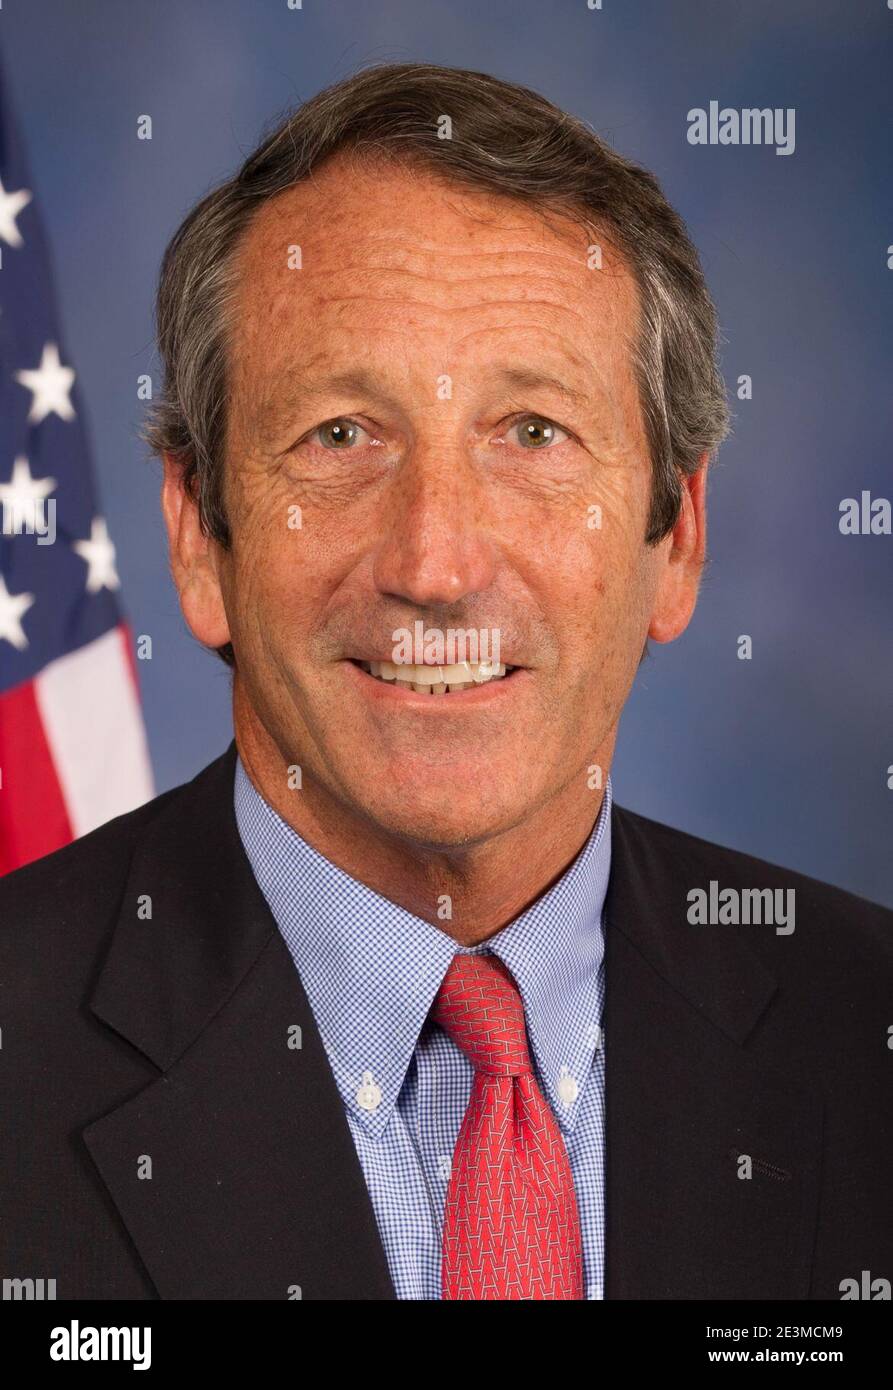 Mark Sanford, Official Portrait, 113th Congress (cropped). Stock Photo